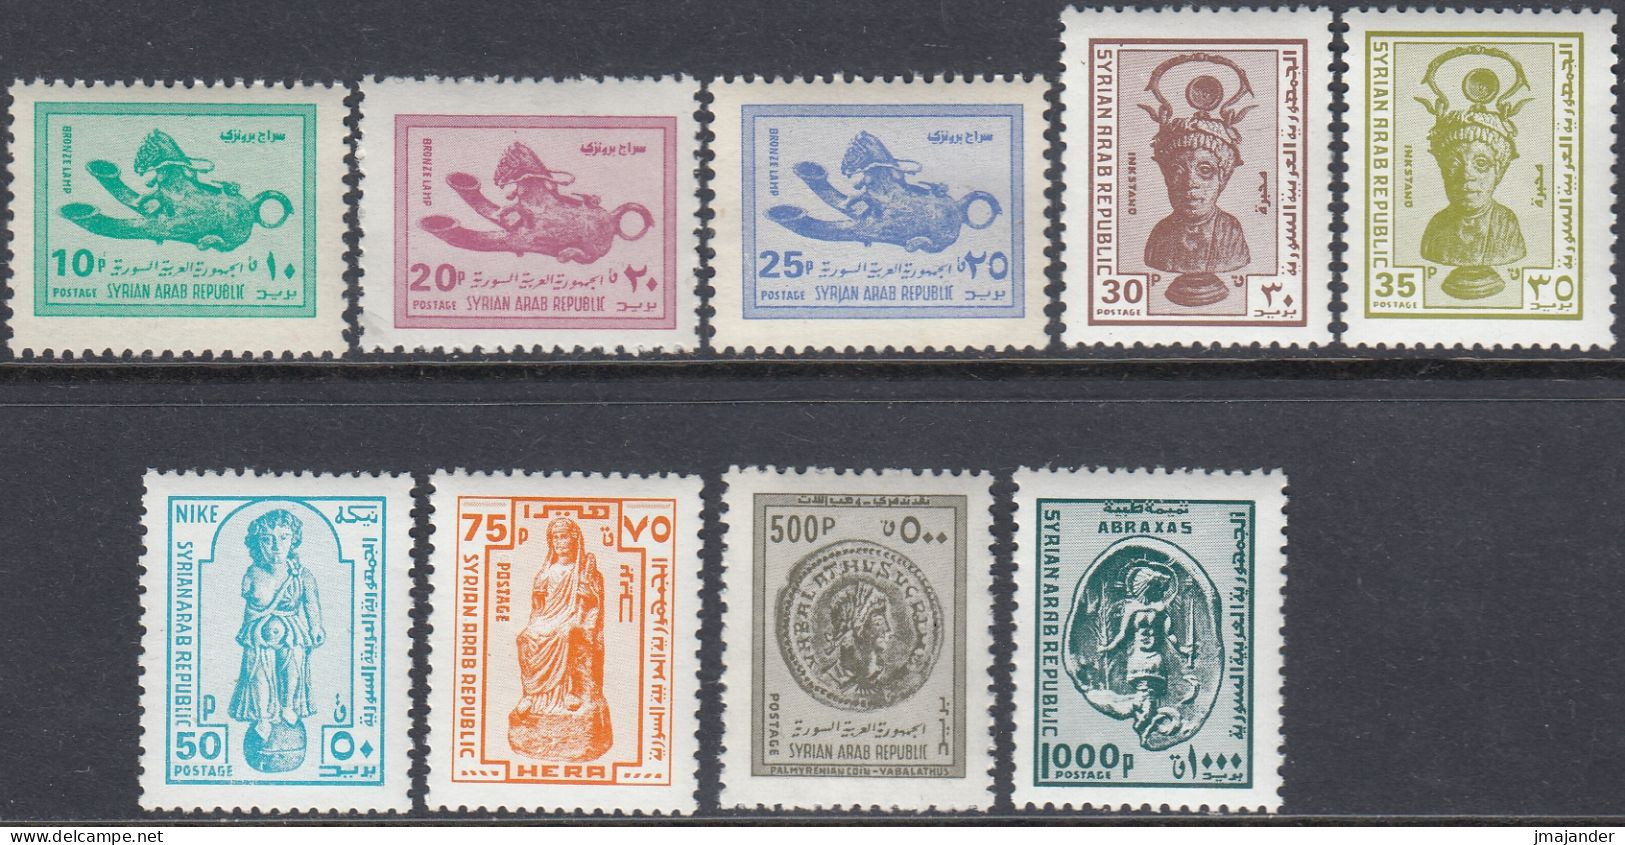 Syria 1976 - Definitive Stamp Set: Archaeological Findings - Mi 1313-1321 ** MNH - Syrien